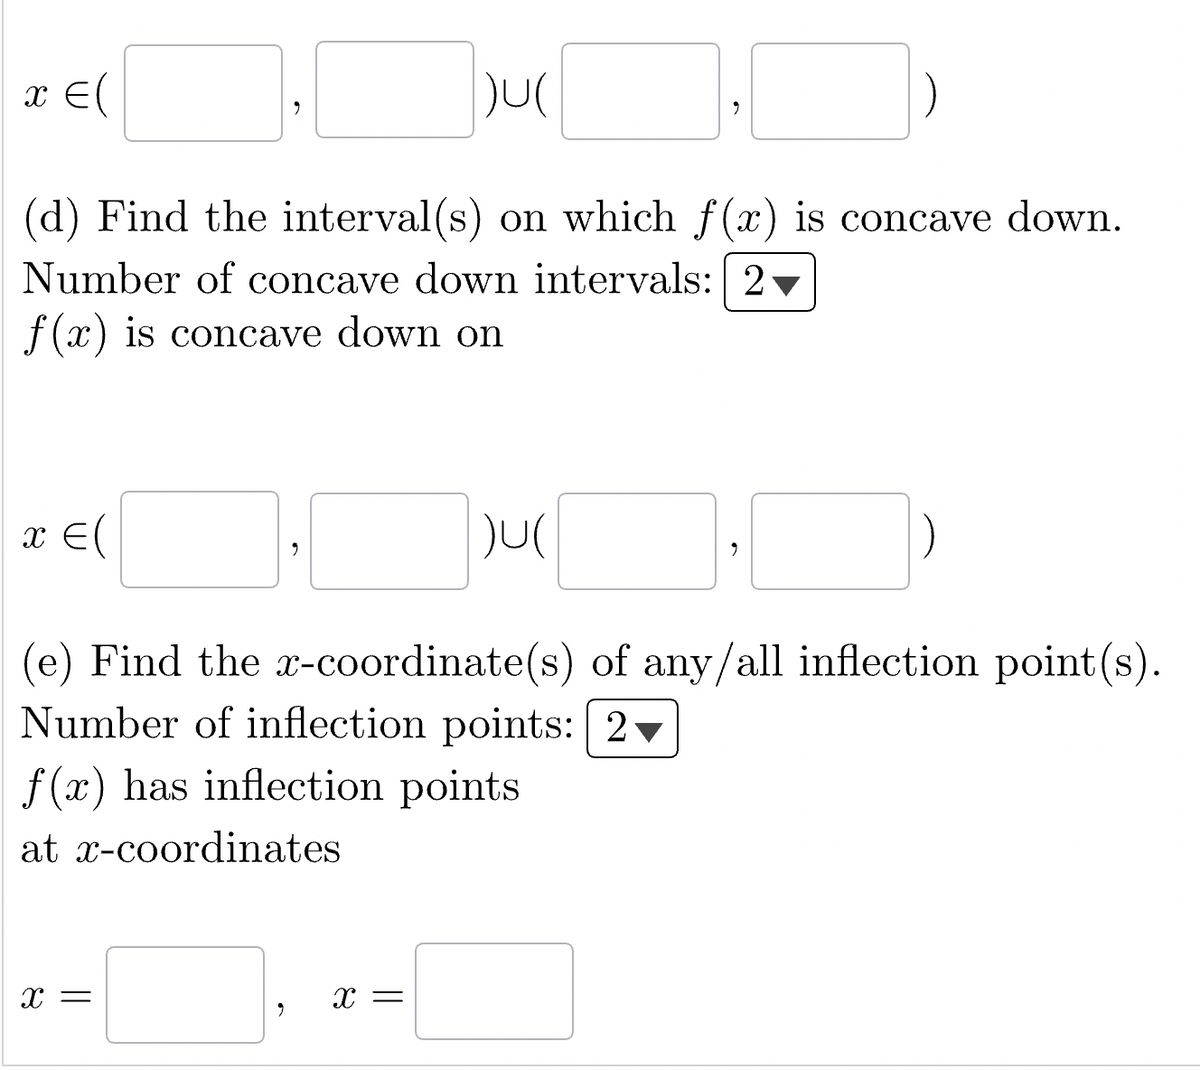 )U(
(d) Find the interval(s) on which f(x) is concave down.
Number of concave down intervals: 2
f(x) is concave down on
x = (
x = (
2
X =
)U(
X =
9
(e) Find the x-coordinate(s) of any/all inflection point(s).
Number of inflection points: 2
f(x) has inflection points
at x-coordinates
9